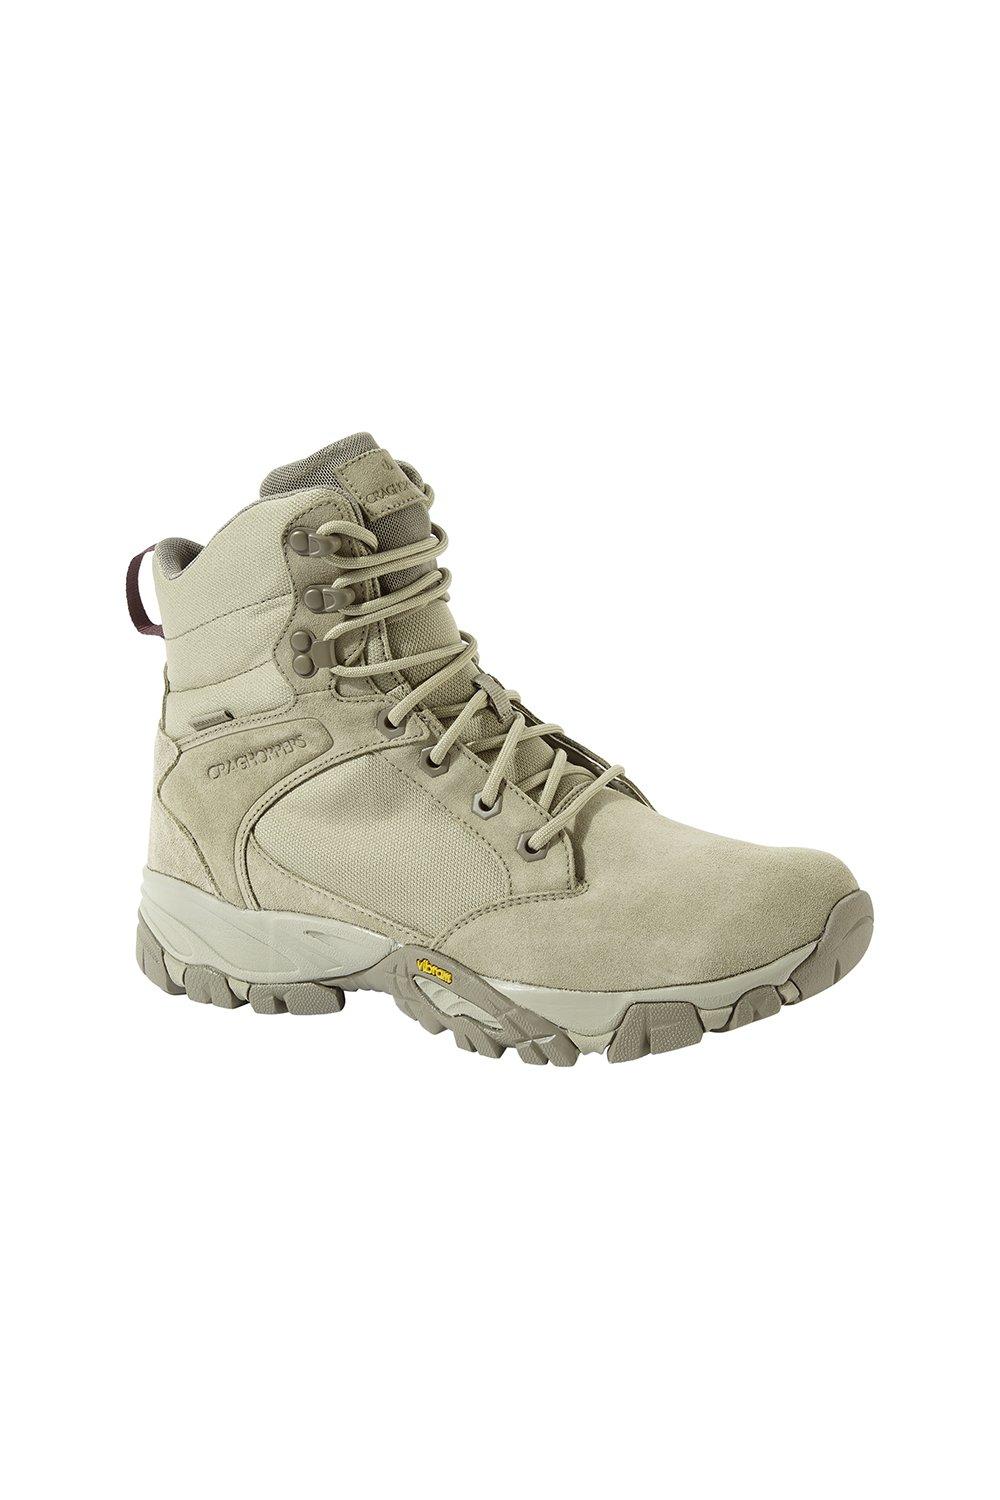 'nosilife salado desert' insect-repellent high hiking boots